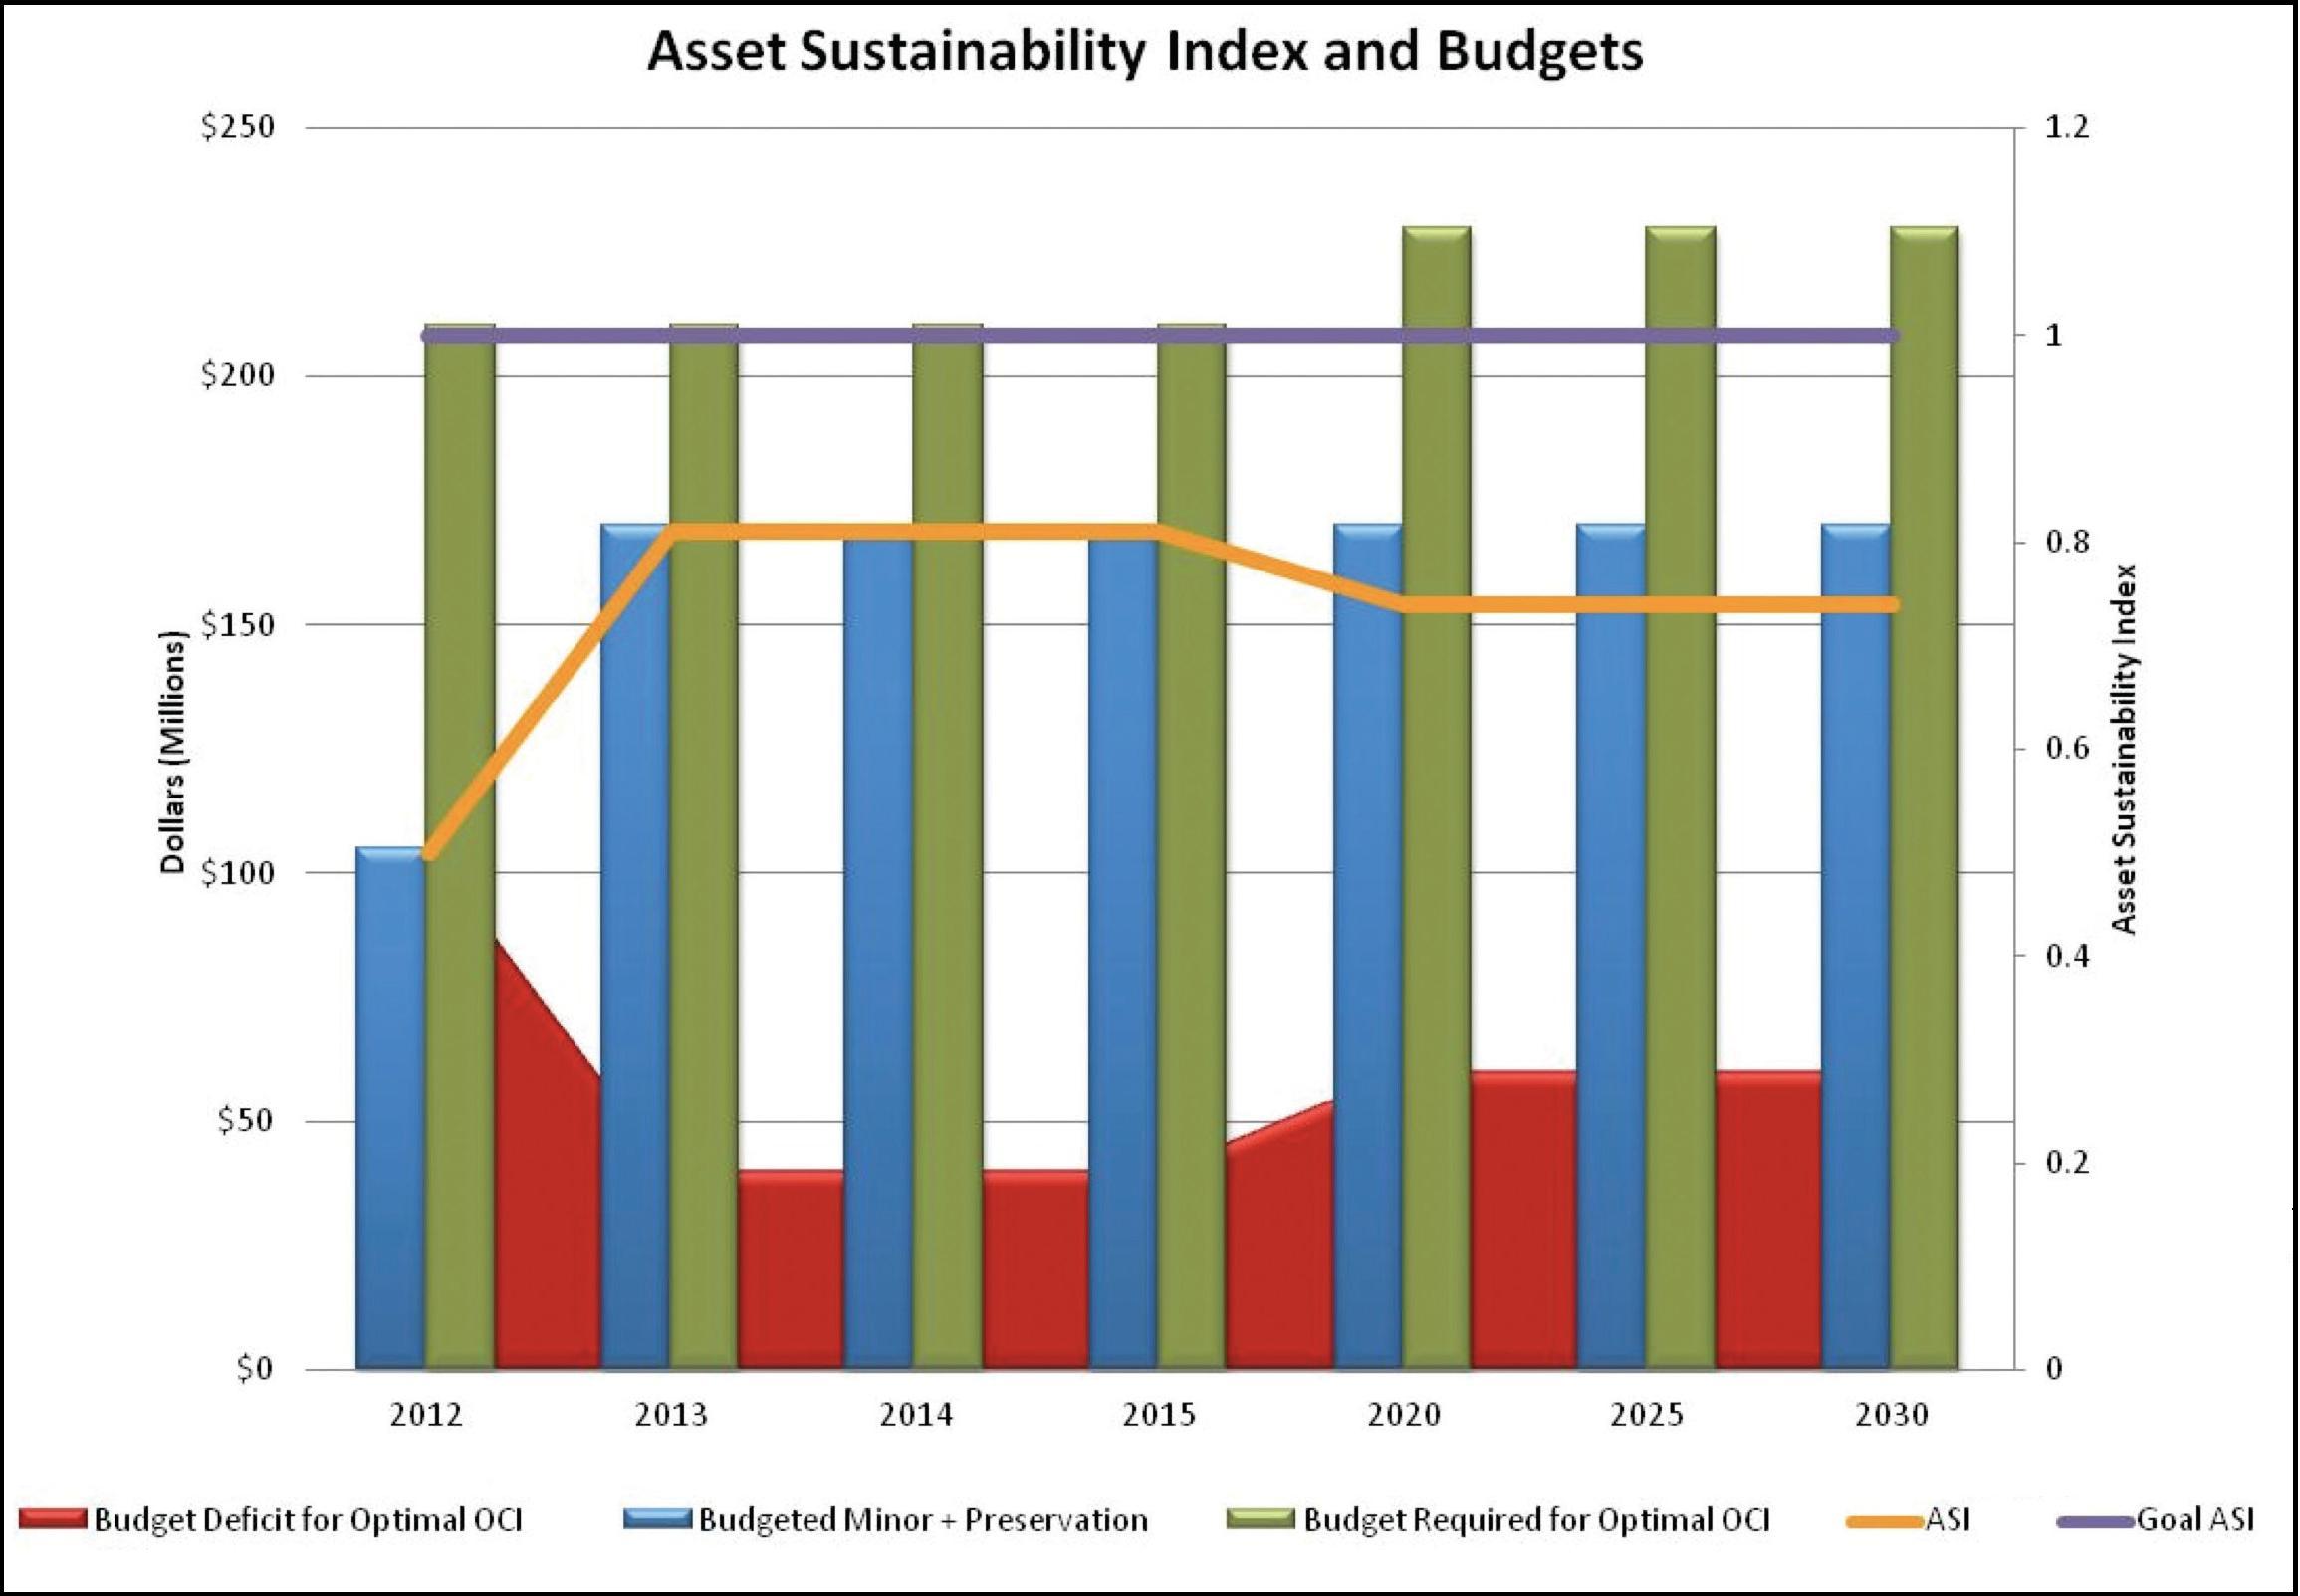 Figure 28 illustrates the pavement sustainability ratio overall for the Utah DOT based on the analysis described.  The optimum sustainability ratio is 1.0 but based upon available budgets the actual sustainability ratio will vary from a low of approximately point 5 in 2012 and then will increase to about point 8 in 2013 and remain at point 8 until 2020 when it will fall to about point 75.  The optimal that should be budgeted to achieve all condition targets is 210 million dollars  in 2012 through 2015 and should increase to 230 million dollars for the period 2020 through 2030.  However, actual expenditures are forecast to be  at about 170 million dollars annually from 2013 through 2030.  The budget deficit varies from a high of approximately 90 million dollars in 2012 to about 40 million dollars in 2013, 2014 and 2015 and increases to about 60 million dollars from 2025 through 2030.